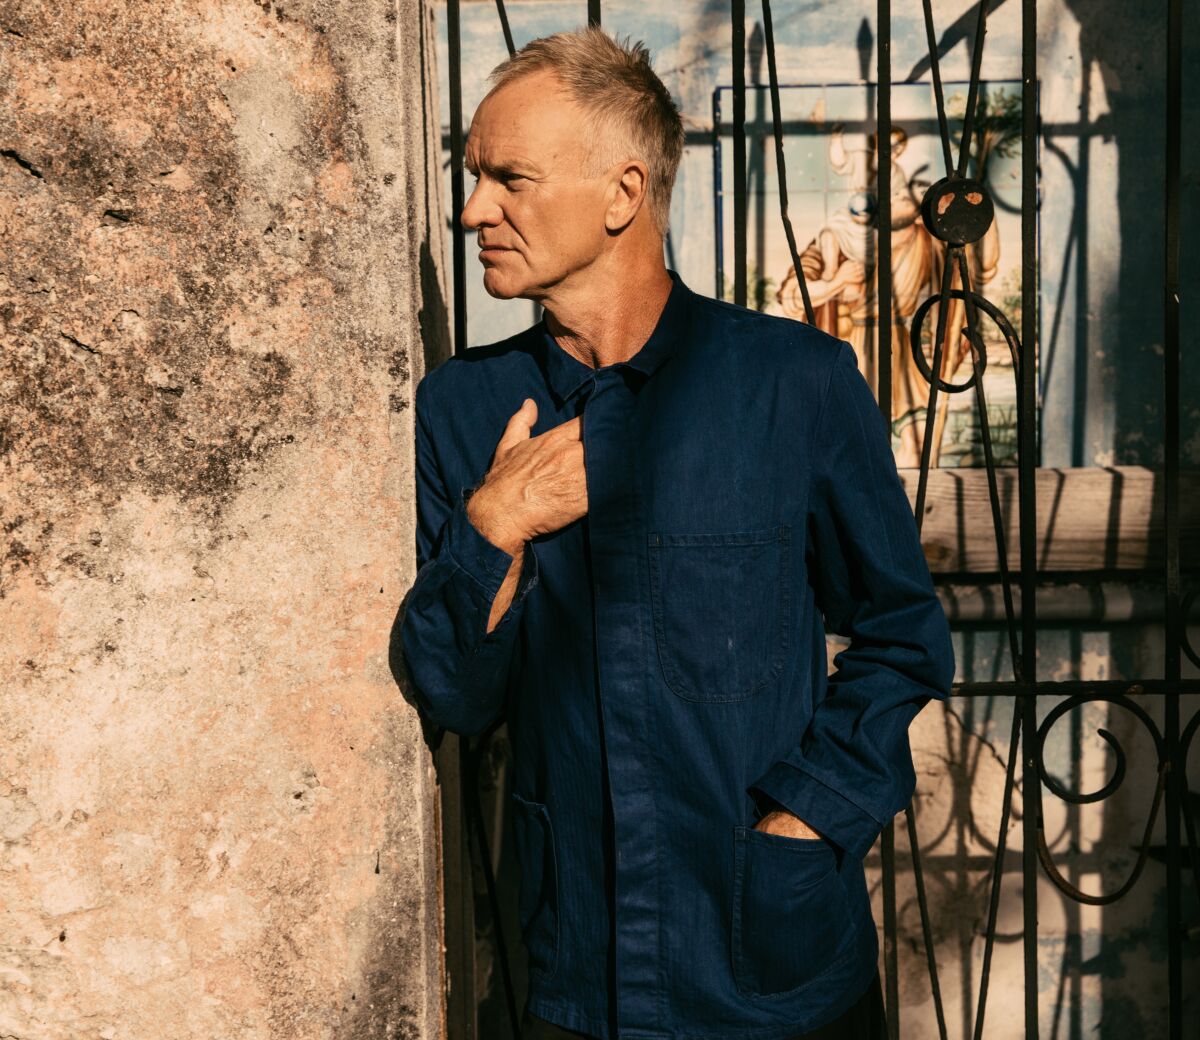 Sting shows respect for Latin music with new Spanish single 'Por su amor'